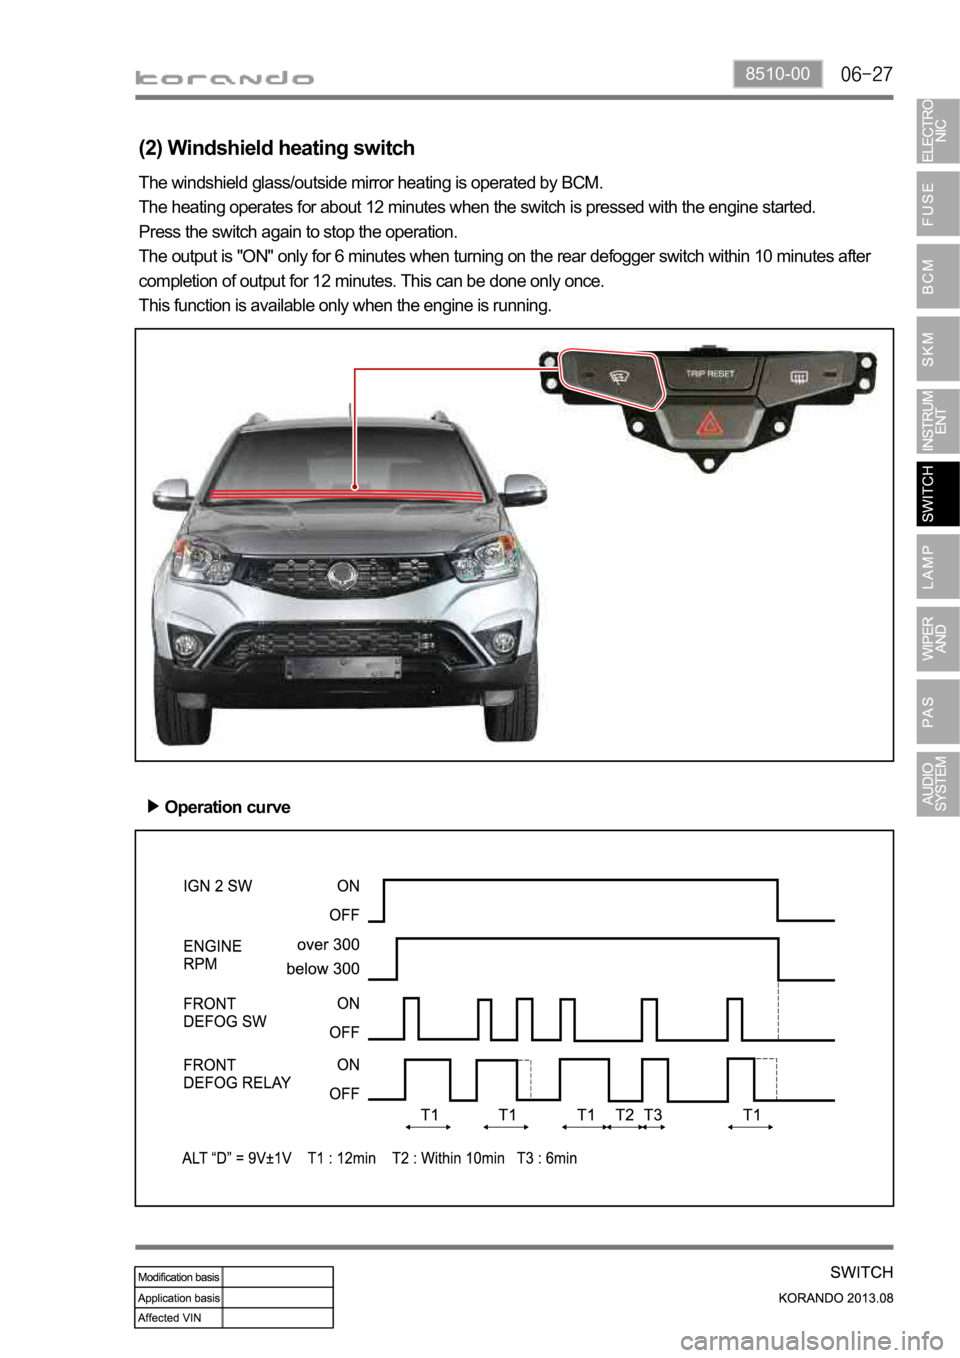 SSANGYONG KORANDO 2013  Service Manual 8510-00
(2) Windshield heating switch
The windshield glass/outside mirror heating is operated by BCM.
The heating operates for about 12 minutes when the switch is pressed with the engine started.
Pres